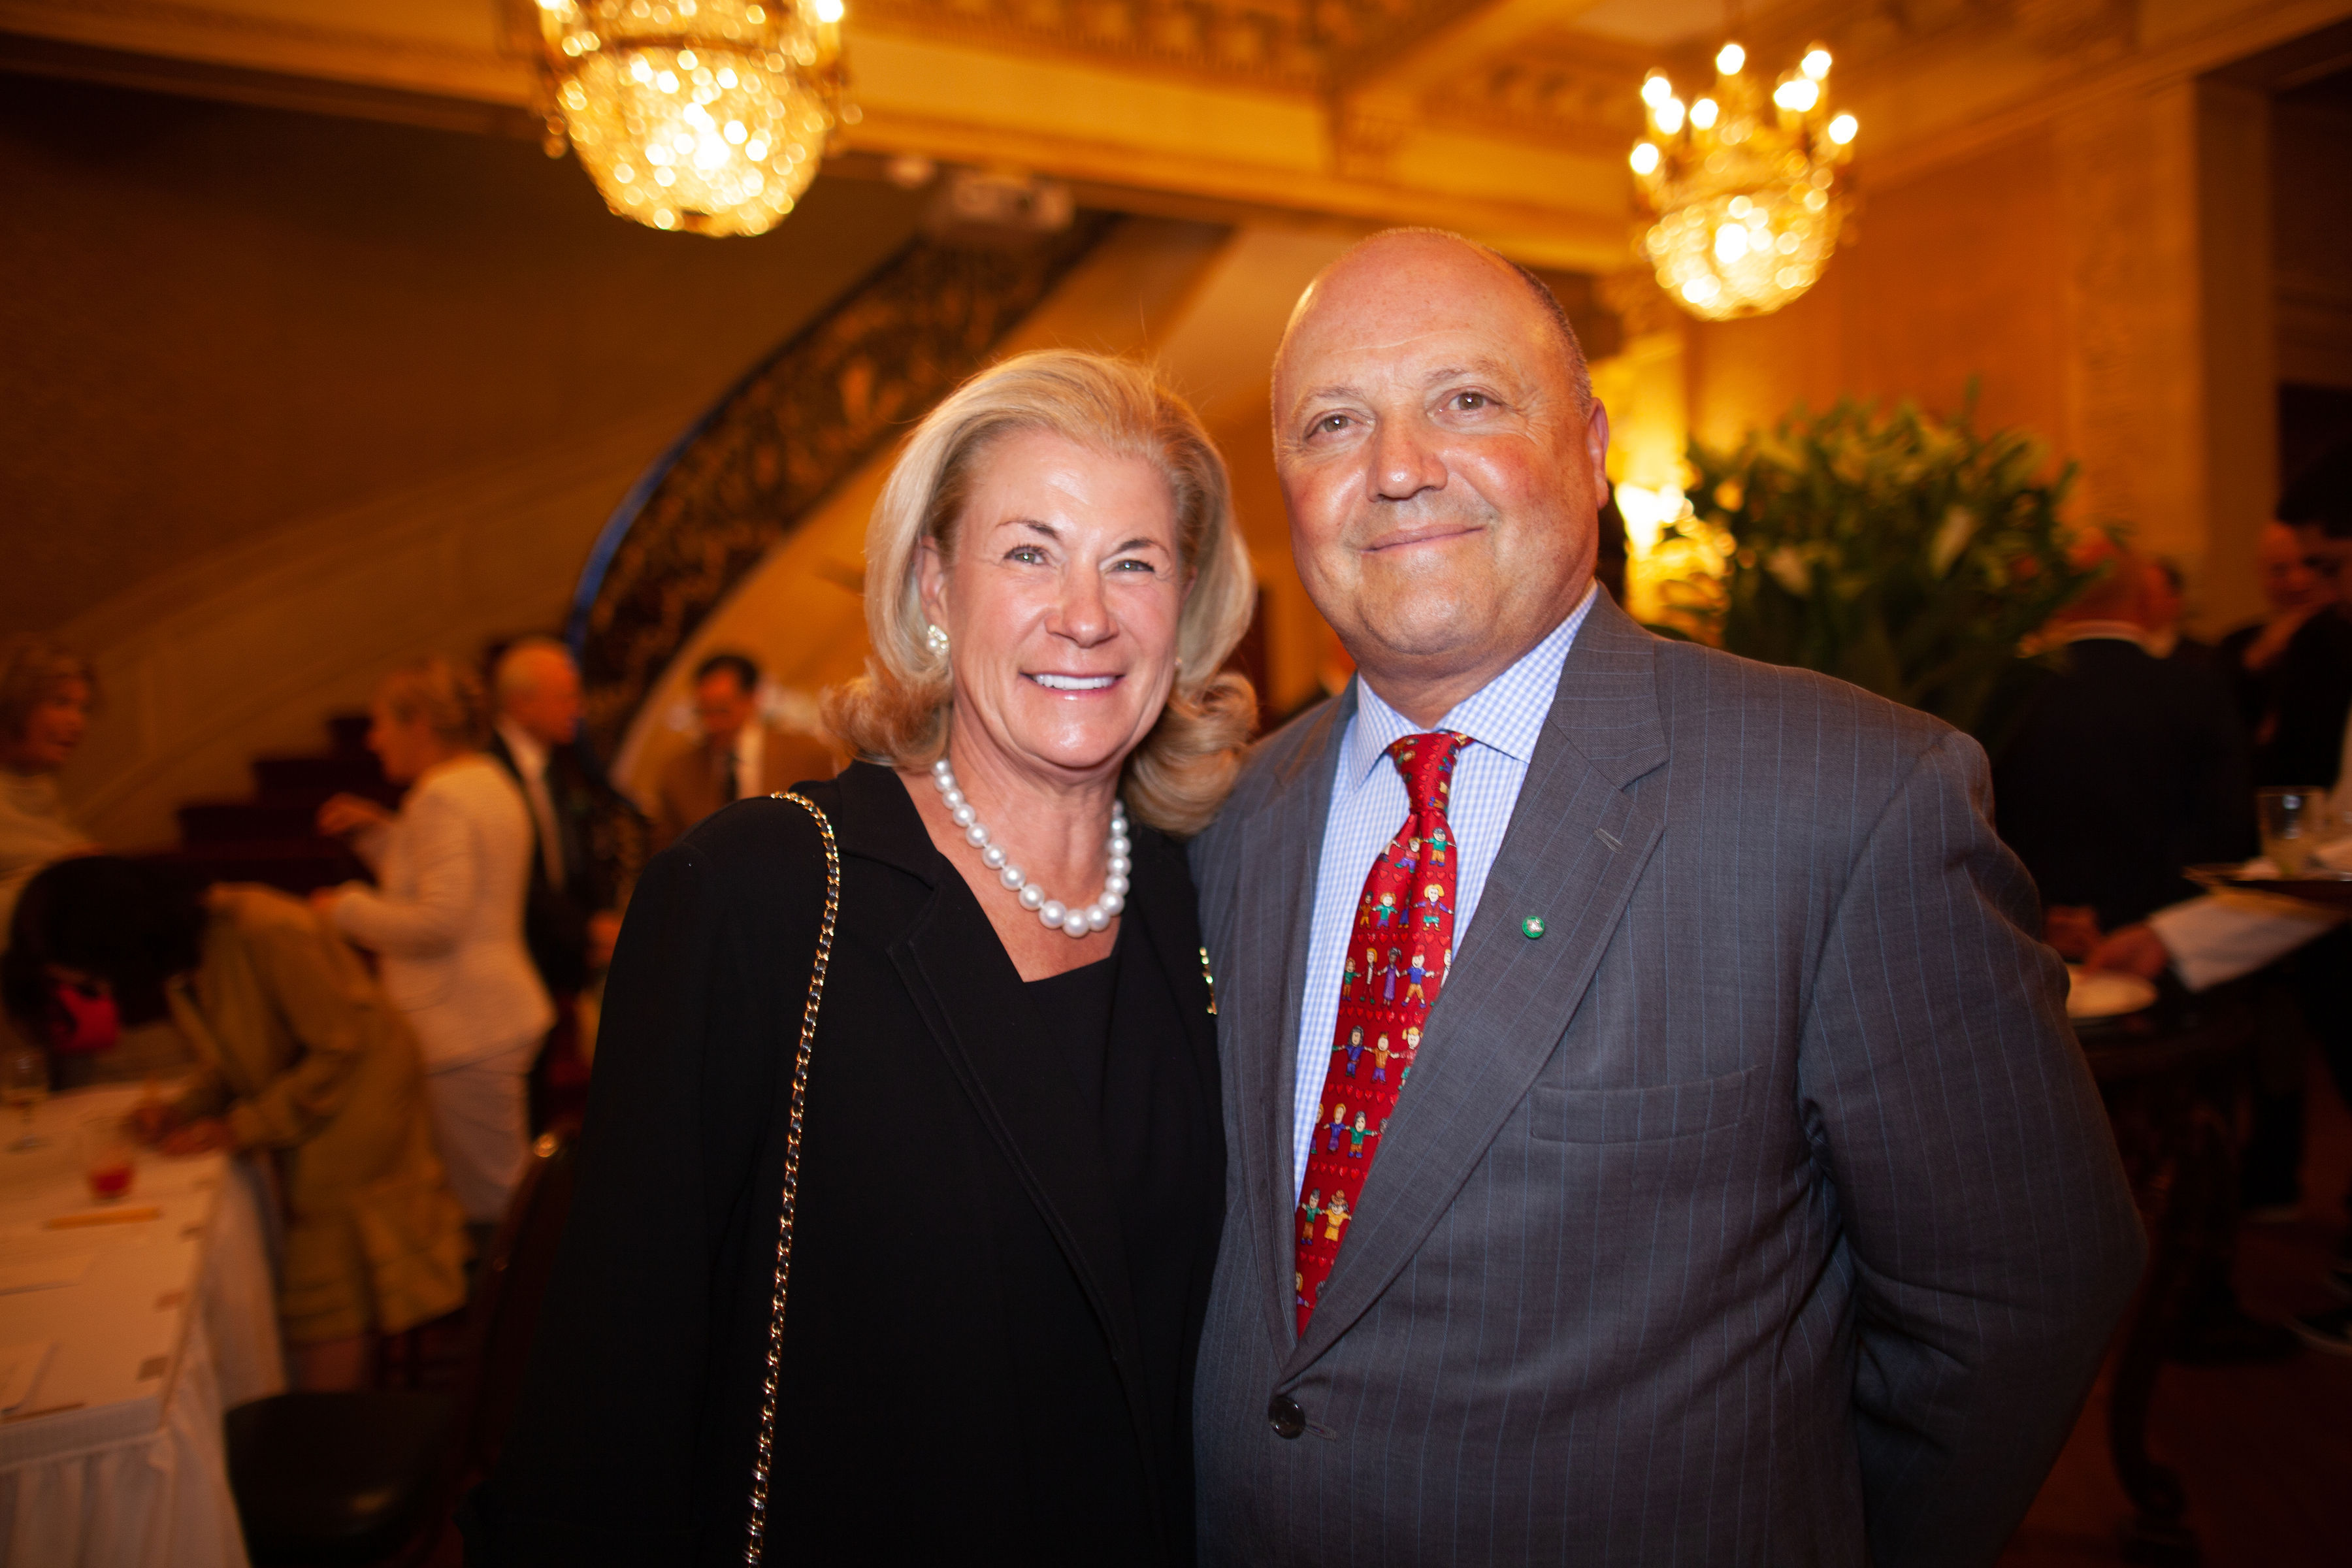 Benefactor and Savoy Foundation Vice President and Treasurer Vincent Pica II and Mrs. Jo Marie Pica.